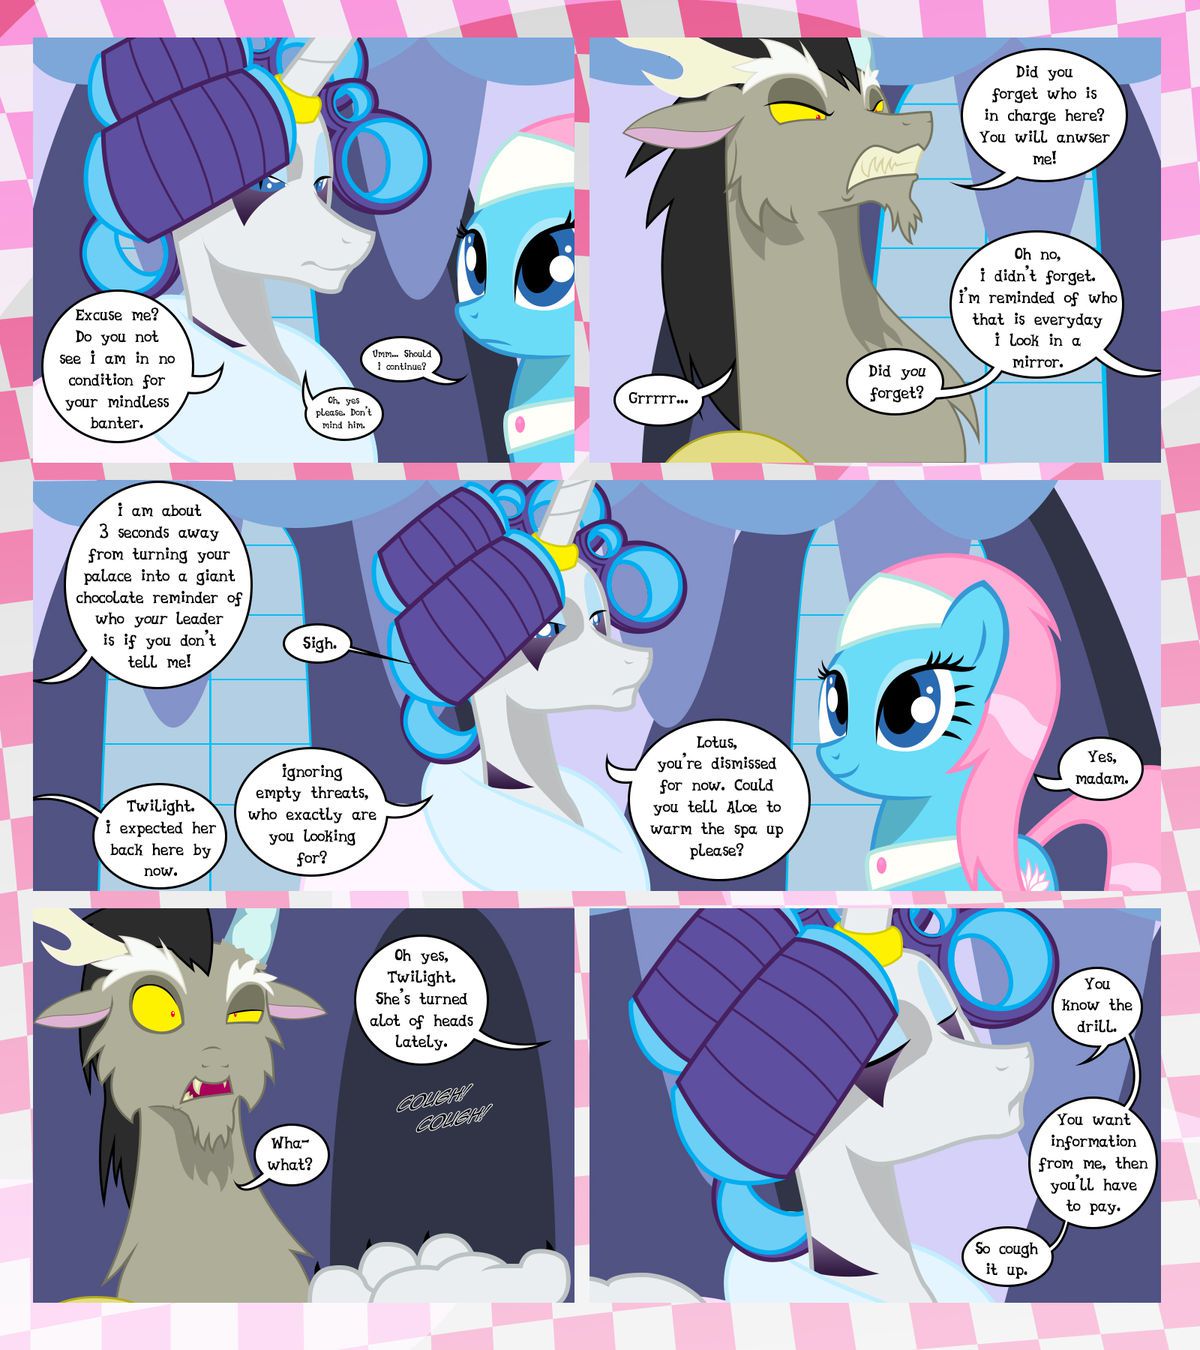 [GatesMcCloud] Cutie Mark Crusaders 10k: Chapter 3 - The Lost (My Little Pony: Friendship is Magic) [English] [Ongoing] 66